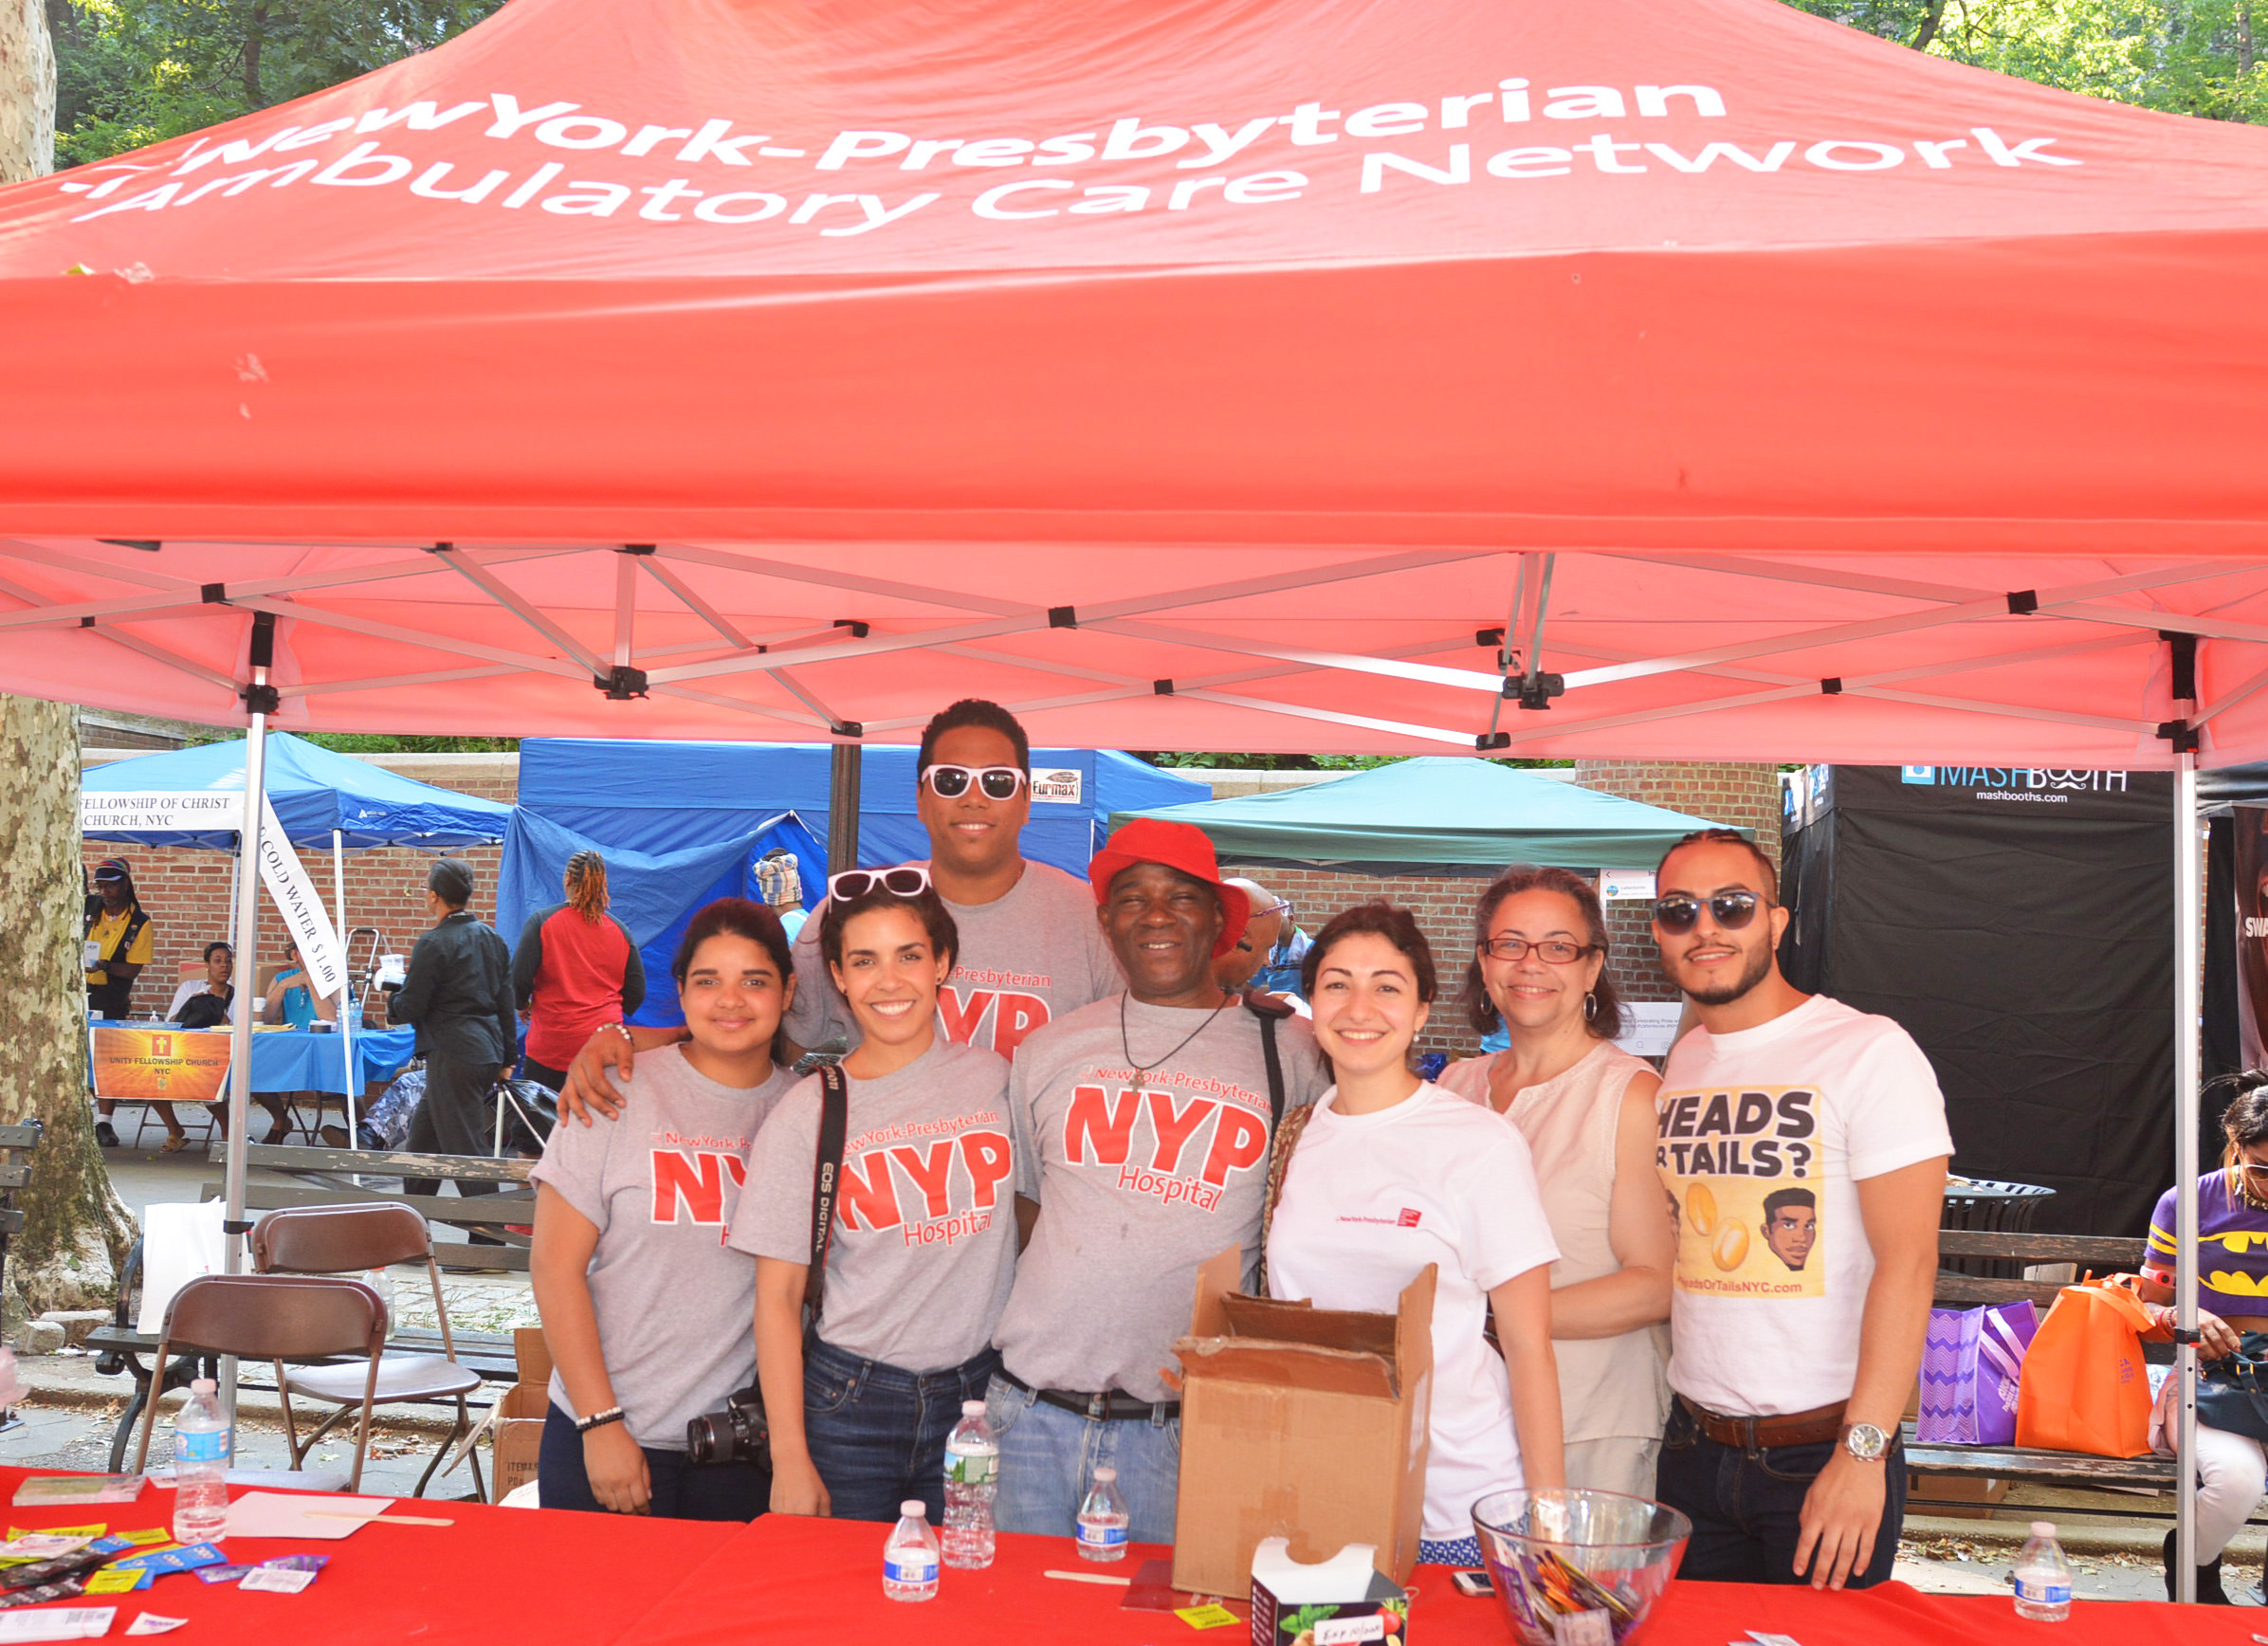 A group of poeple posing for a photo under the NewYork-Presbyterian booth at the Harlem pride event